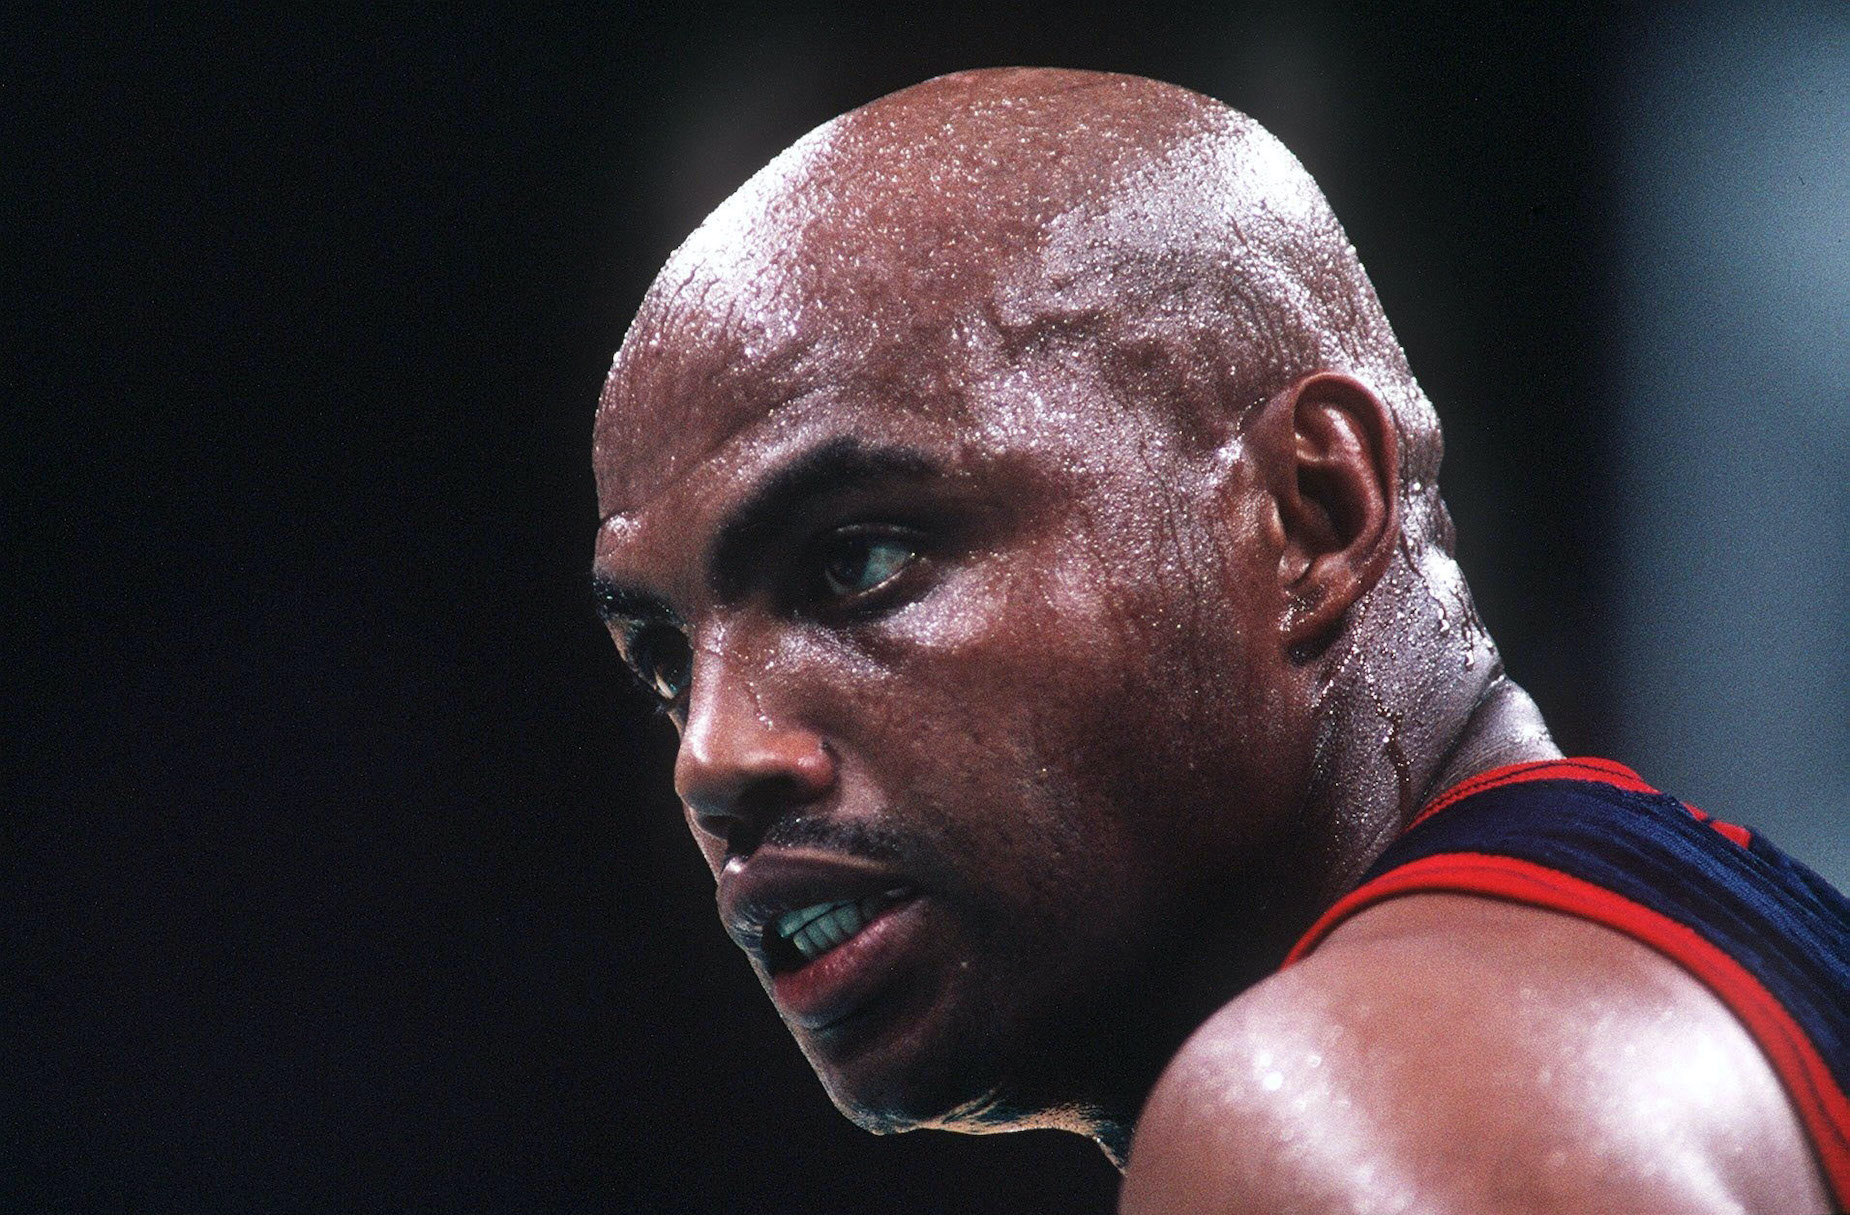 Charles Barkley looks on during a Team USA basketball game.